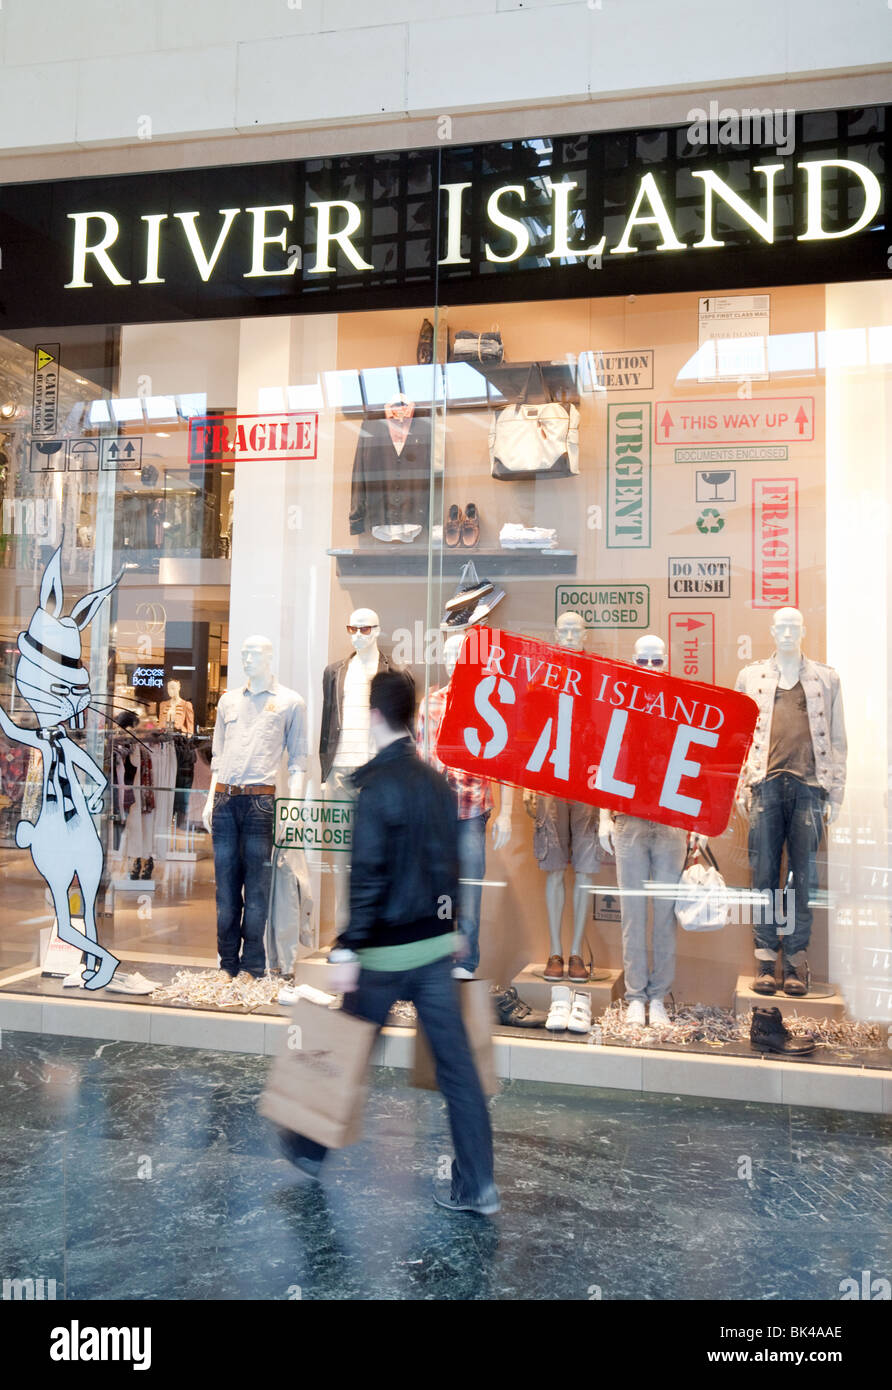 River island clothing store High Resolution Stock Photography and Images -  Alamy